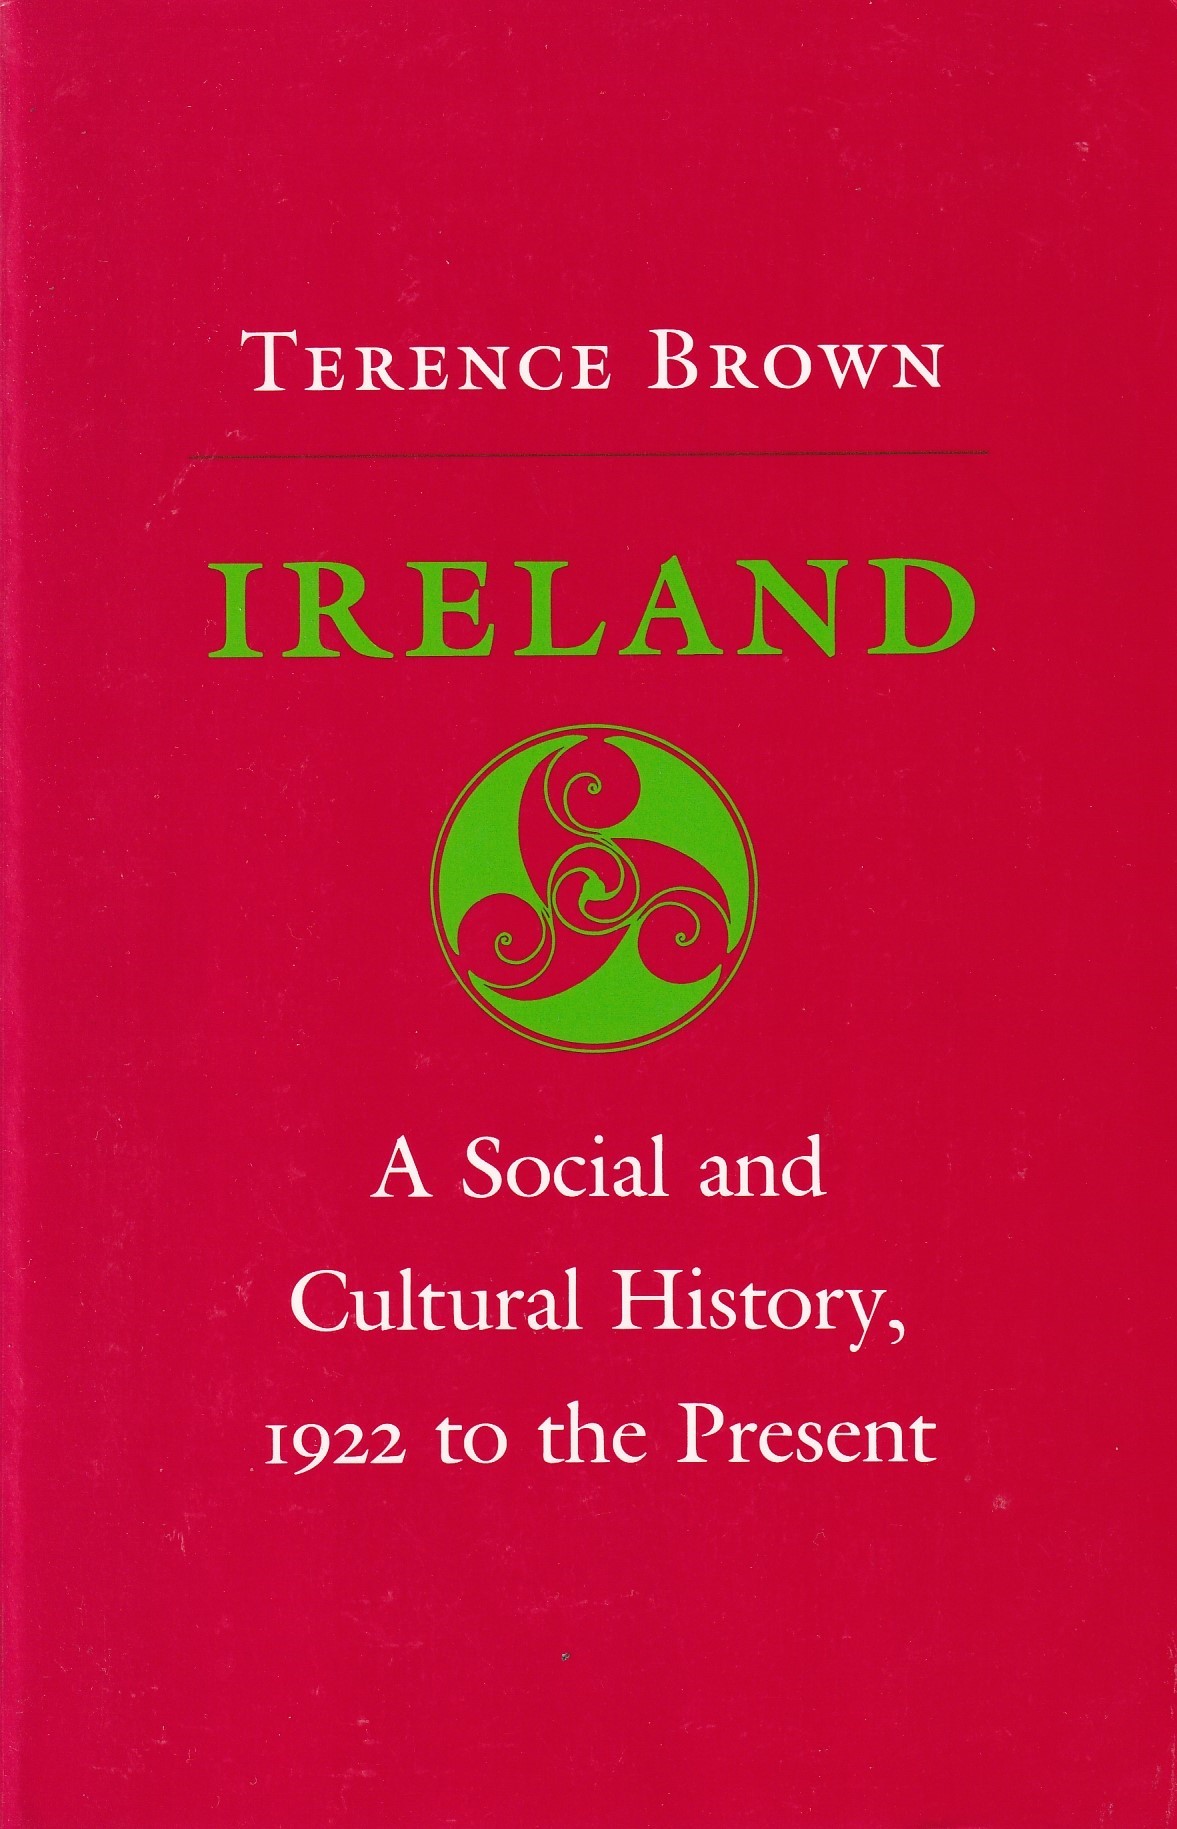 Ireland: A Social and Cultural History, 1922 to the Present by Terence Brown